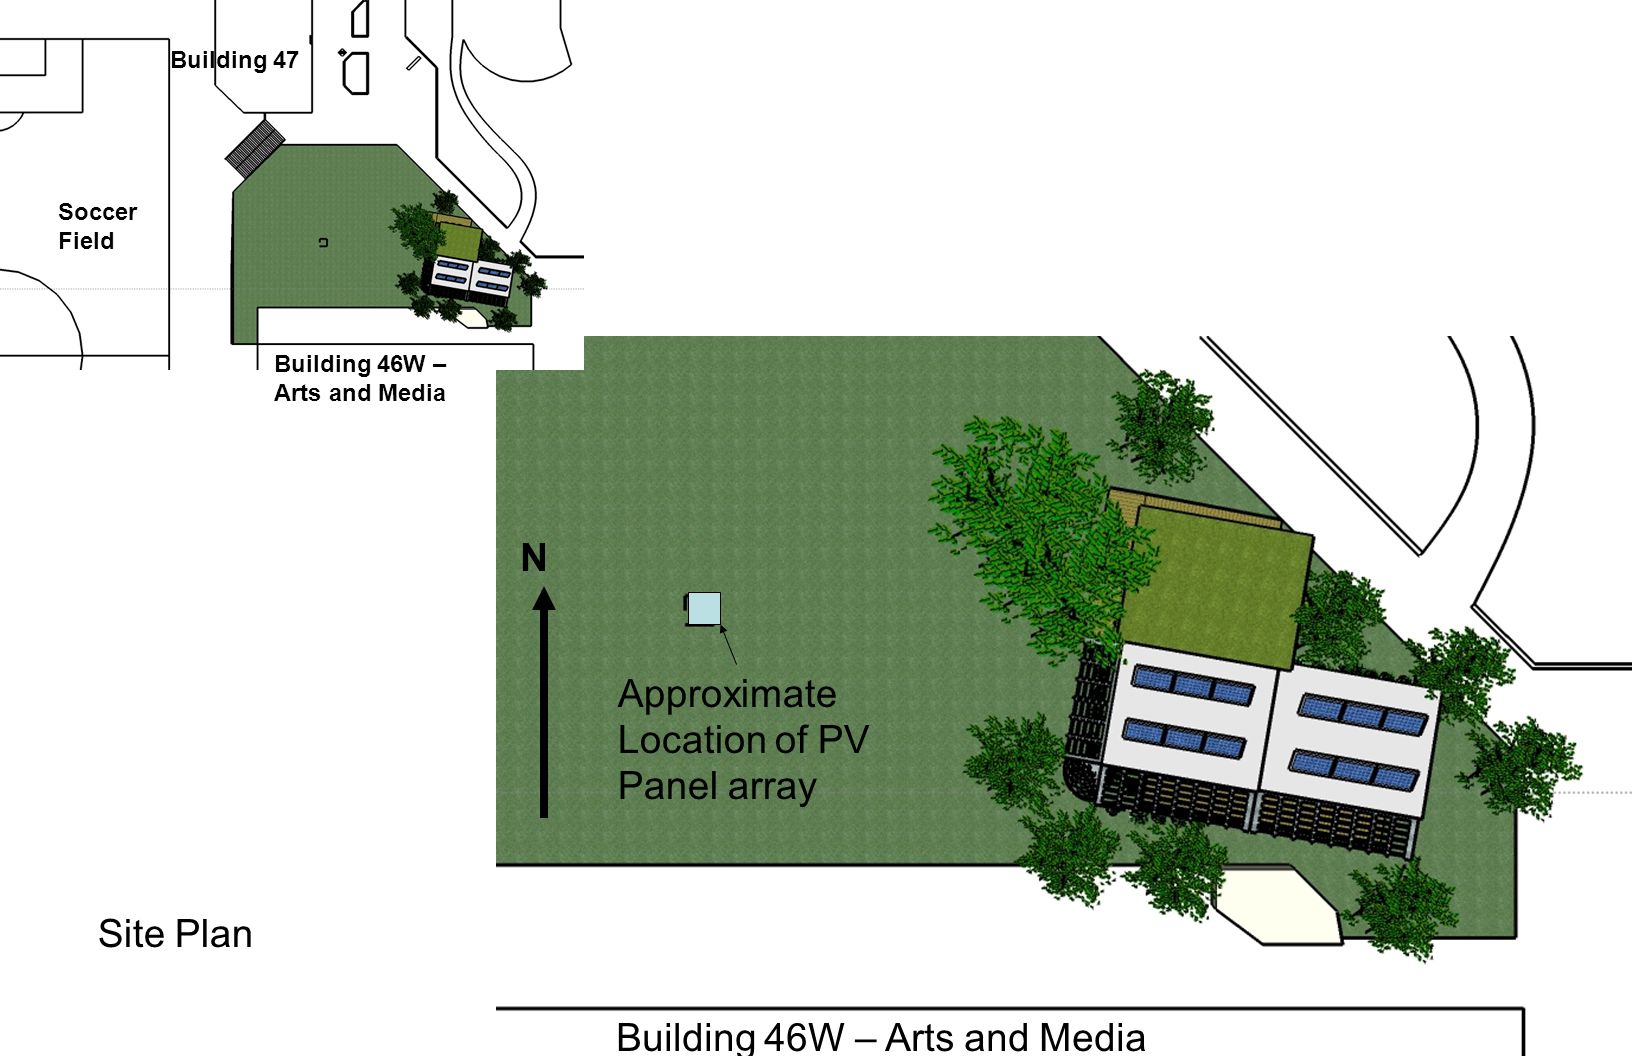 N Building 46W – Arts and Media Building 47 Soccer Field Building 46W – Arts and Media Approximate Location of PV Panel array Site Plan